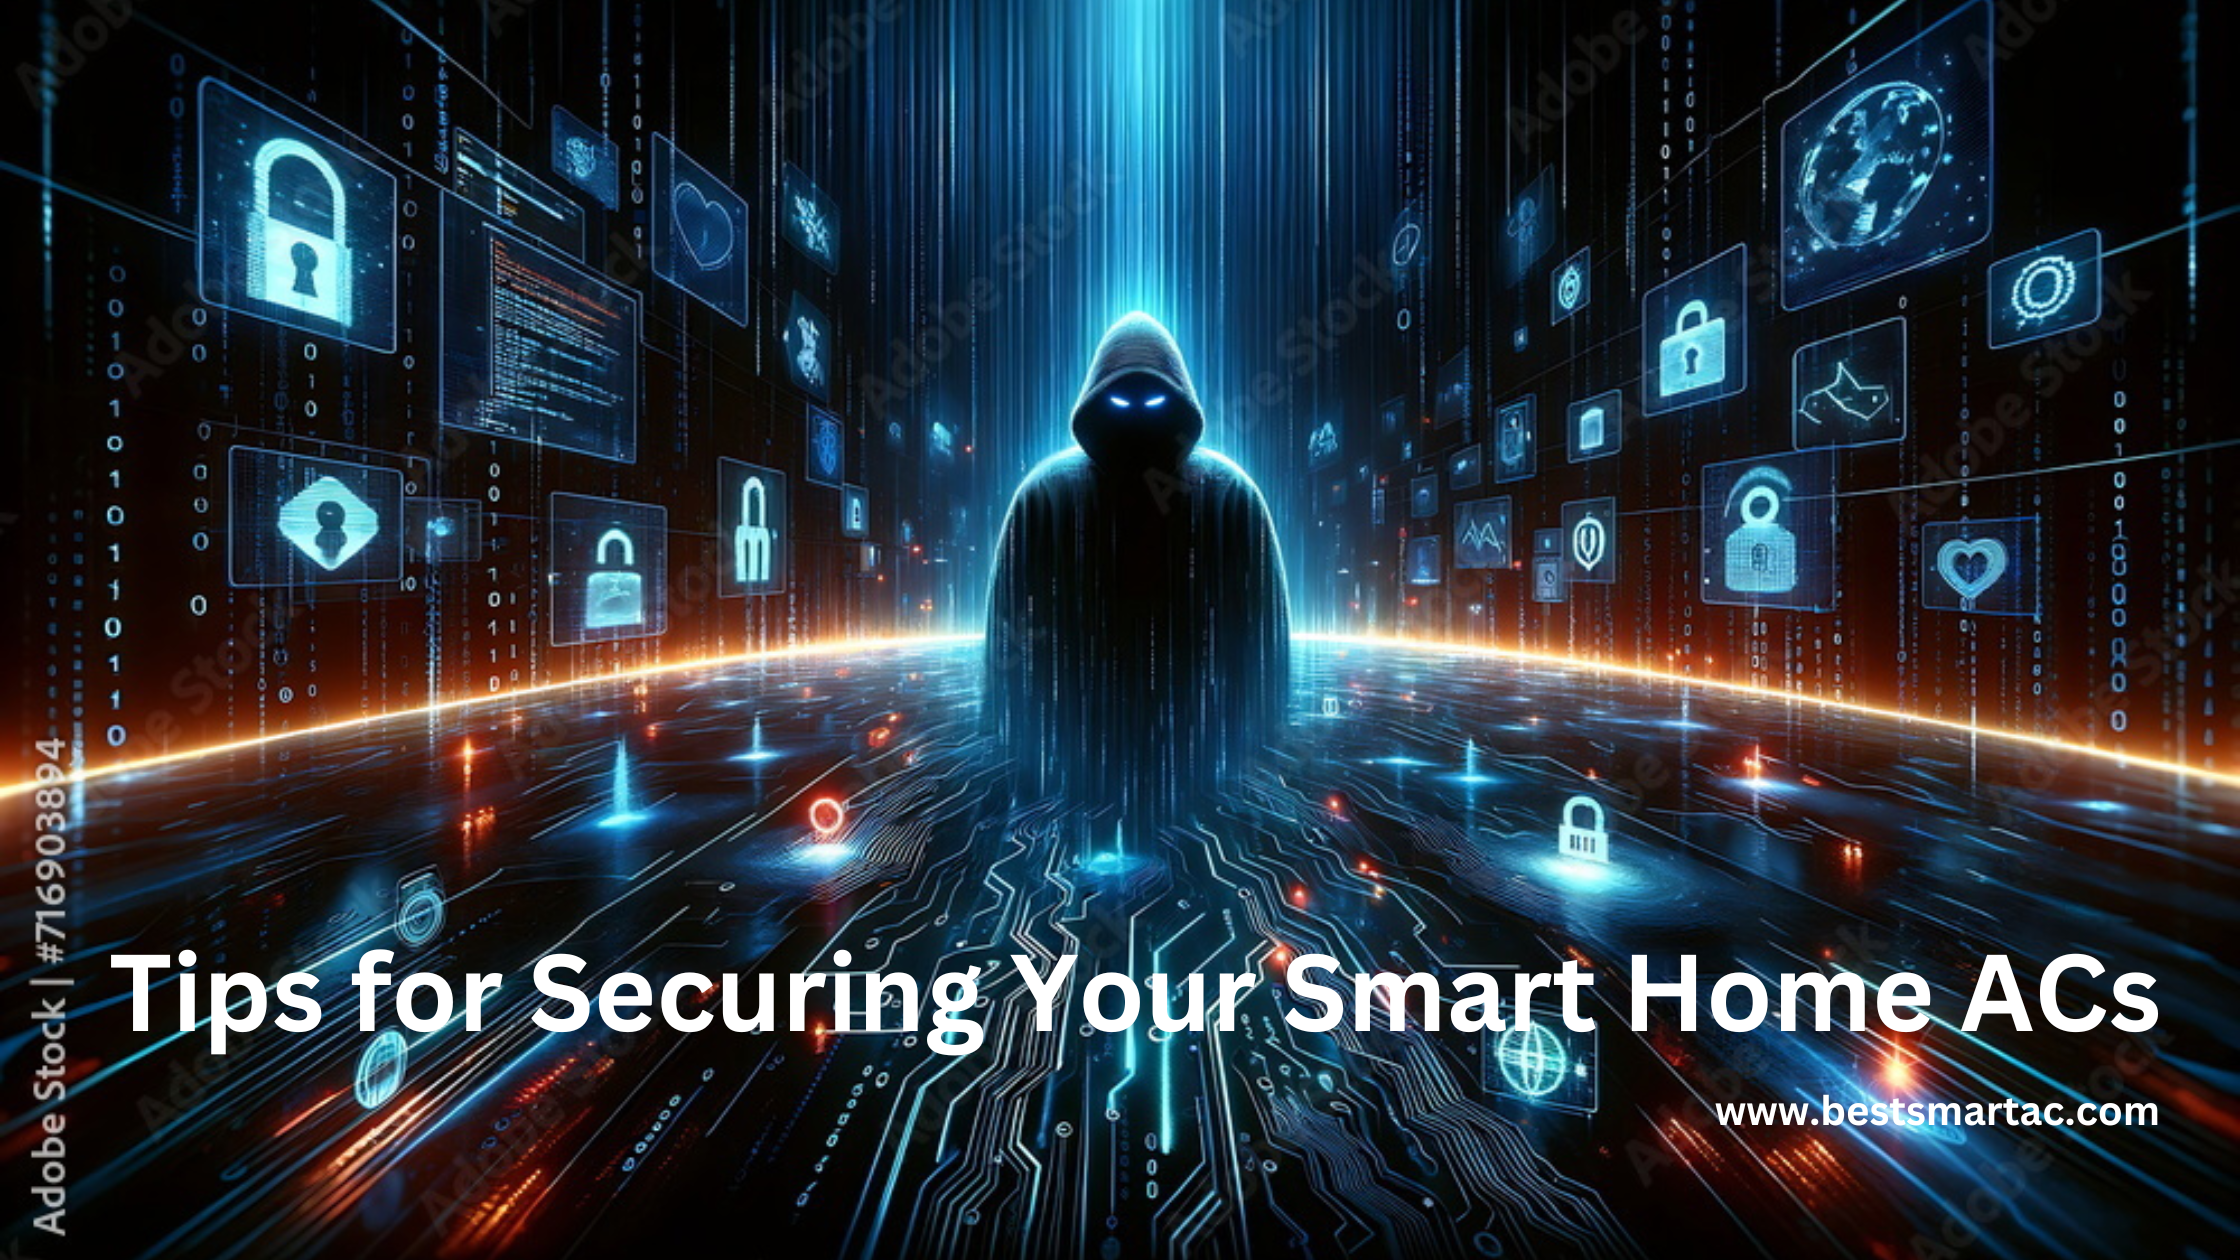 Smart home air conditioning units with security lock icon: Essential tips for securing your smart home ACs against cyber threats and unauthorized access.